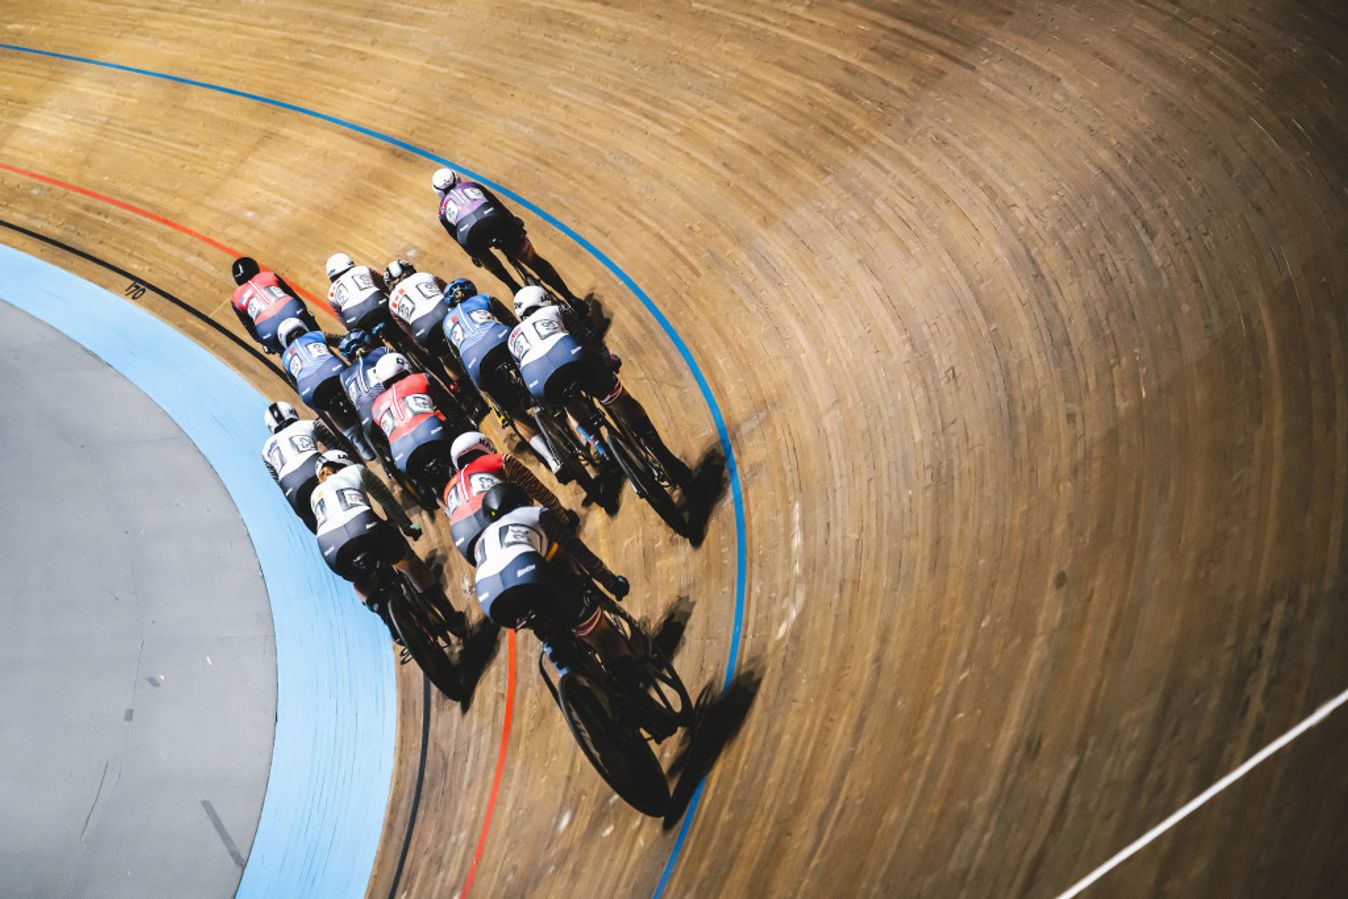 Riders take on the slopes of the velodrome